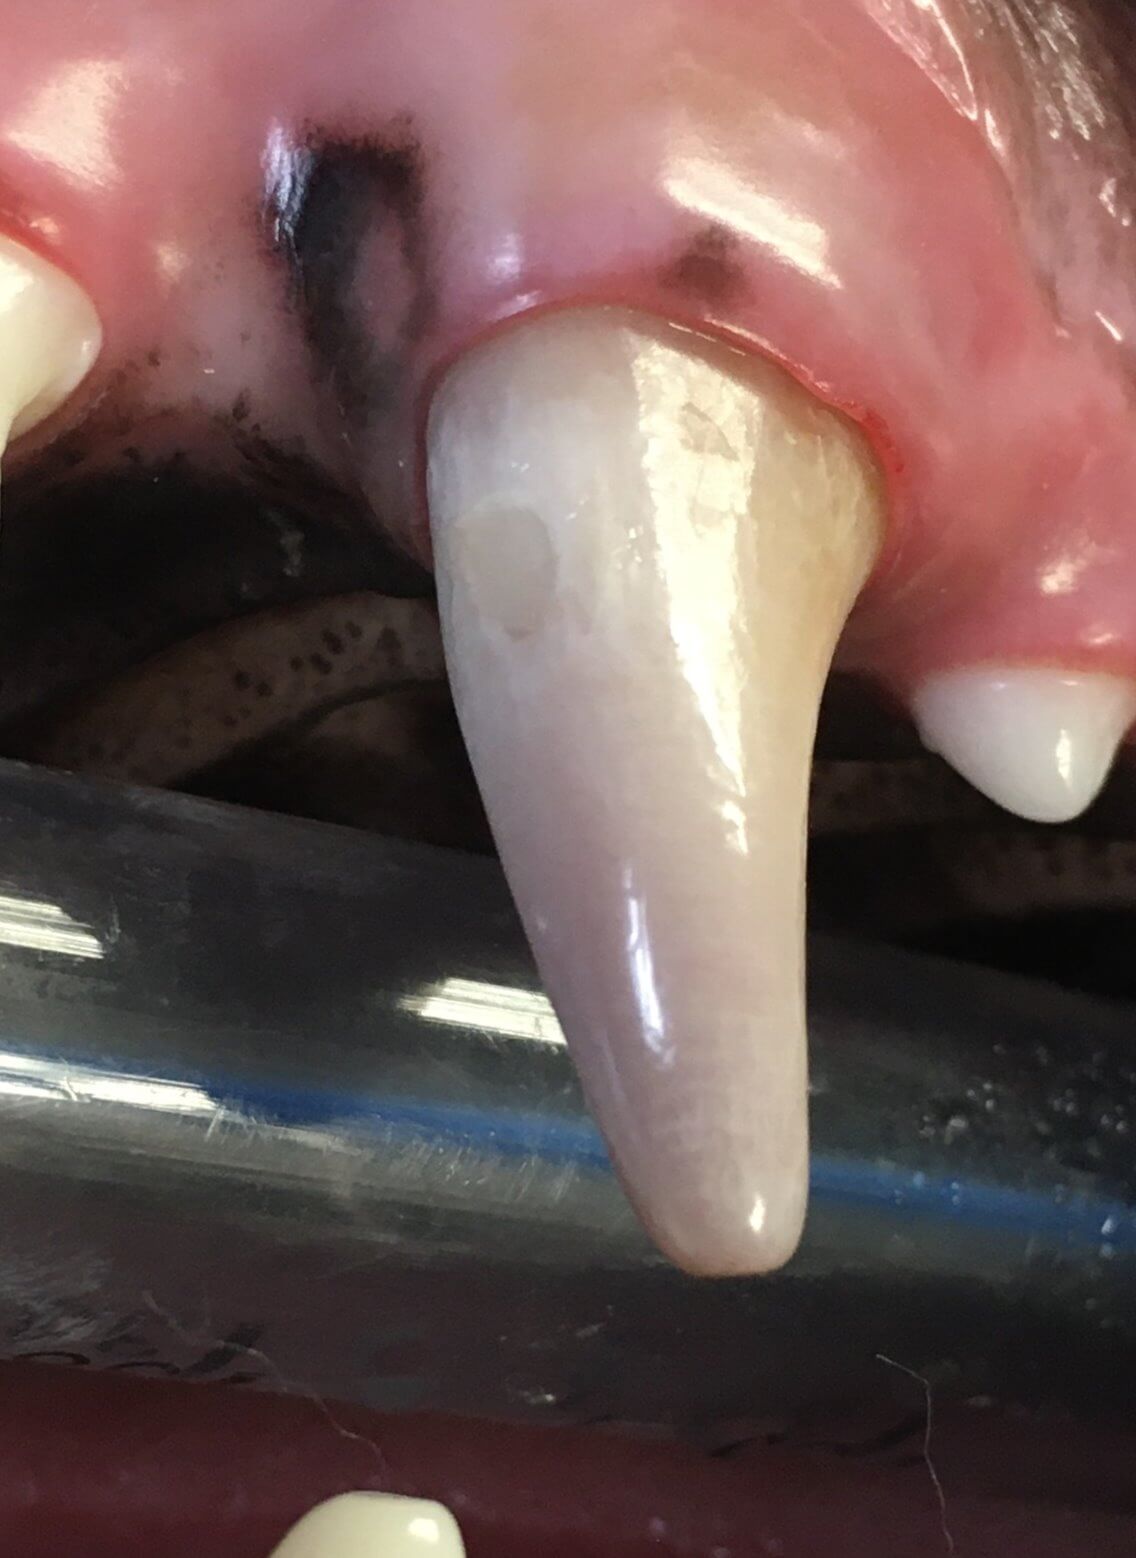  Picture of different Patient's tooth after RCT